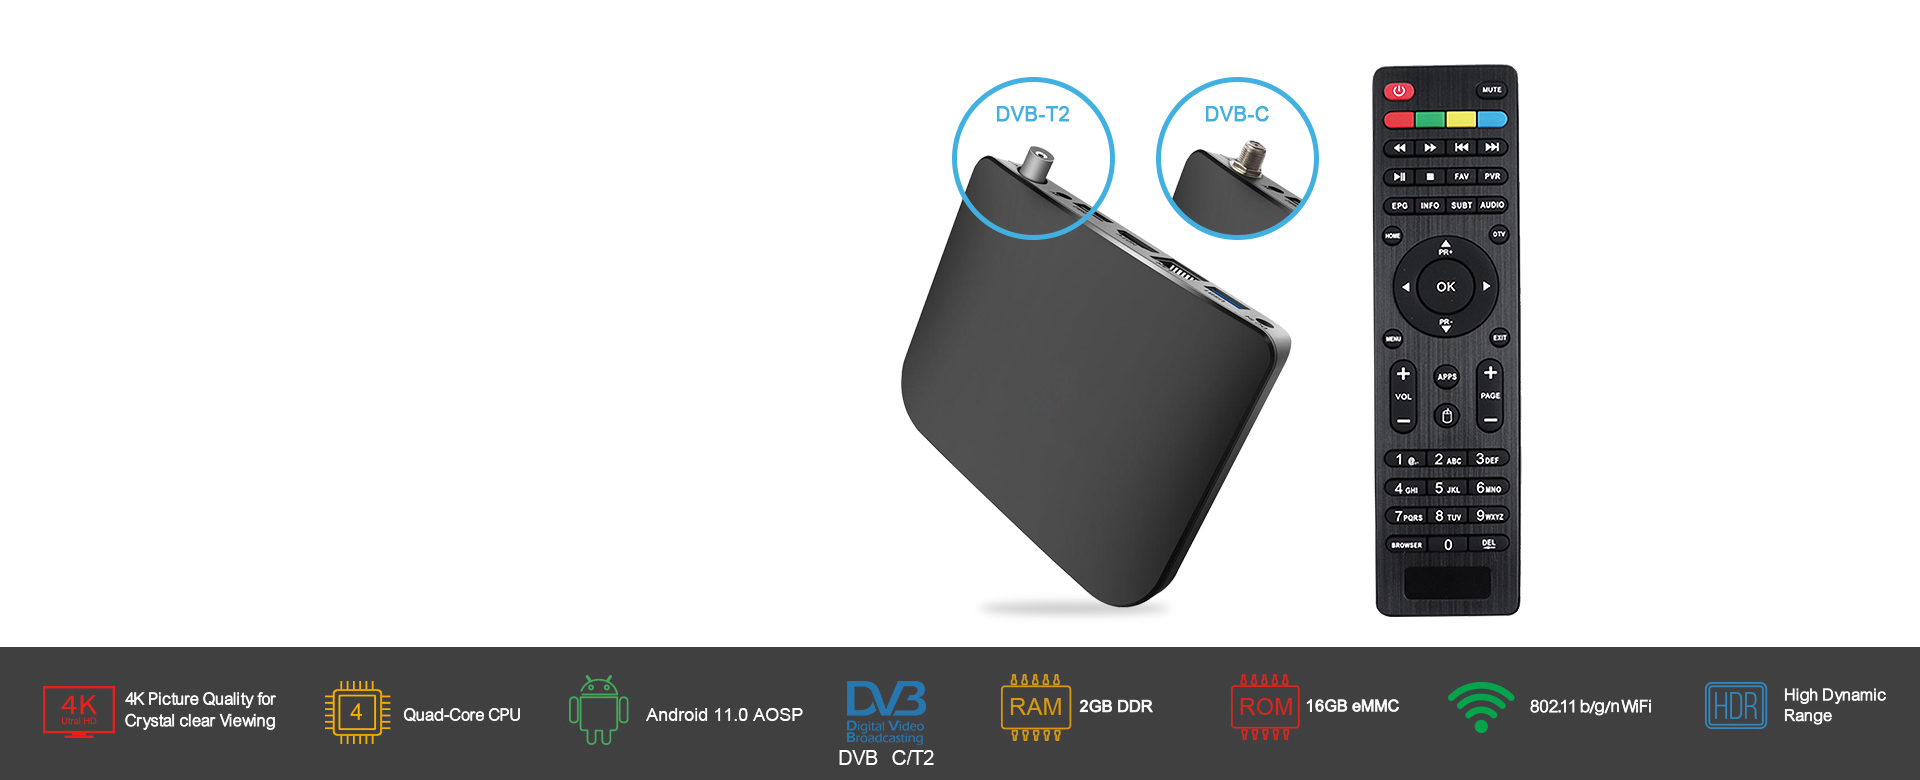 Videostrong 4K hybrid Android TV STB